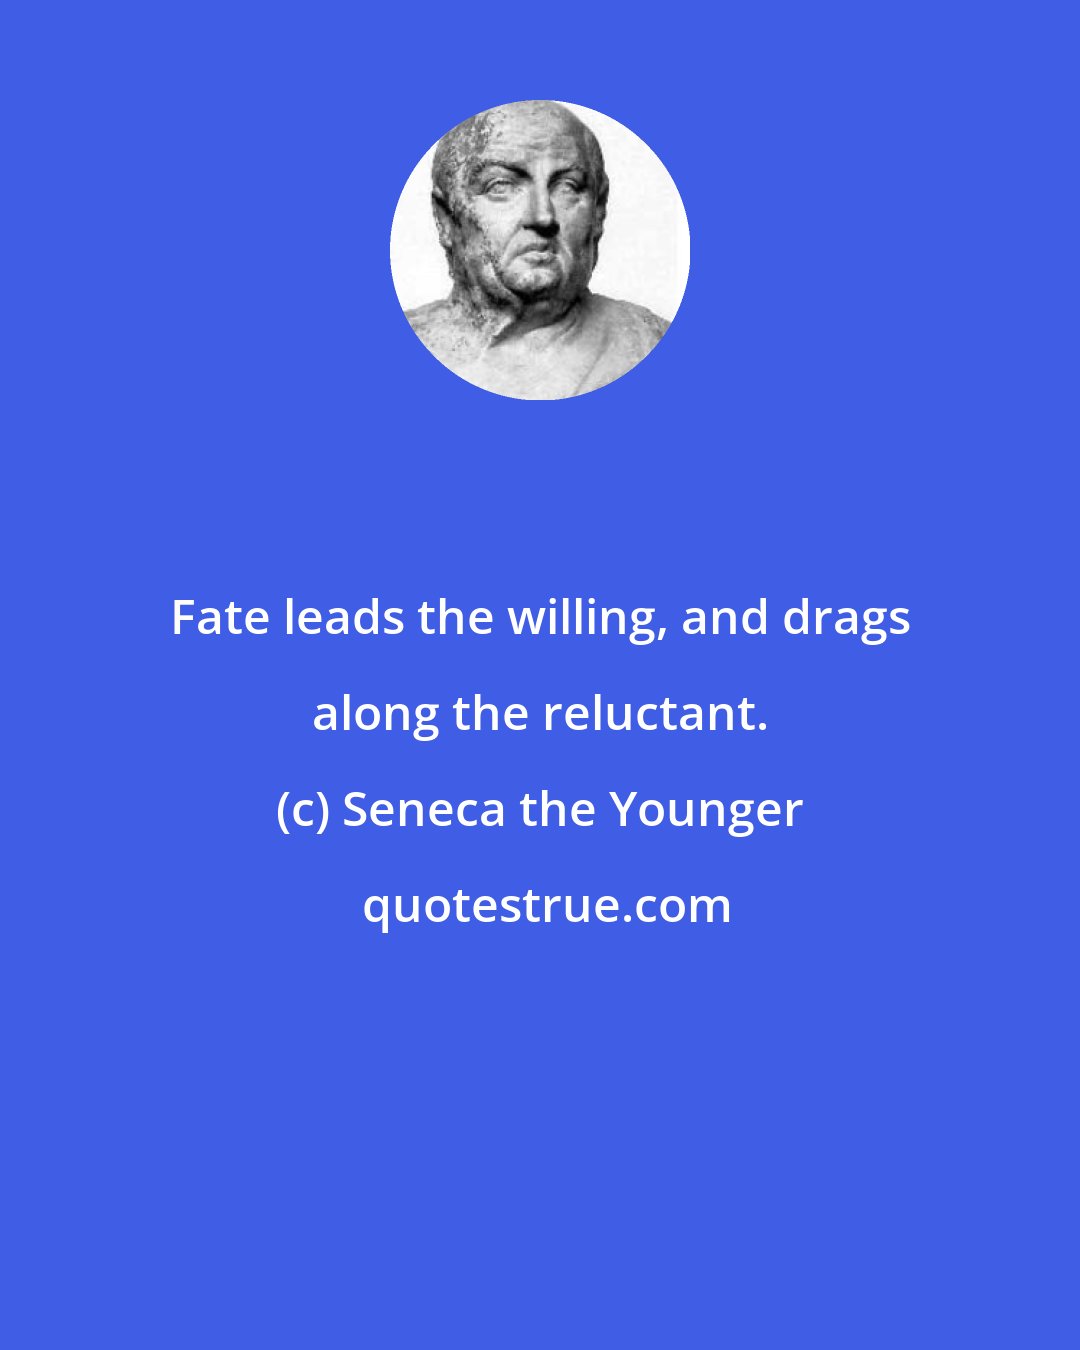 Seneca the Younger: Fate leads the willing, and drags along the reluctant.